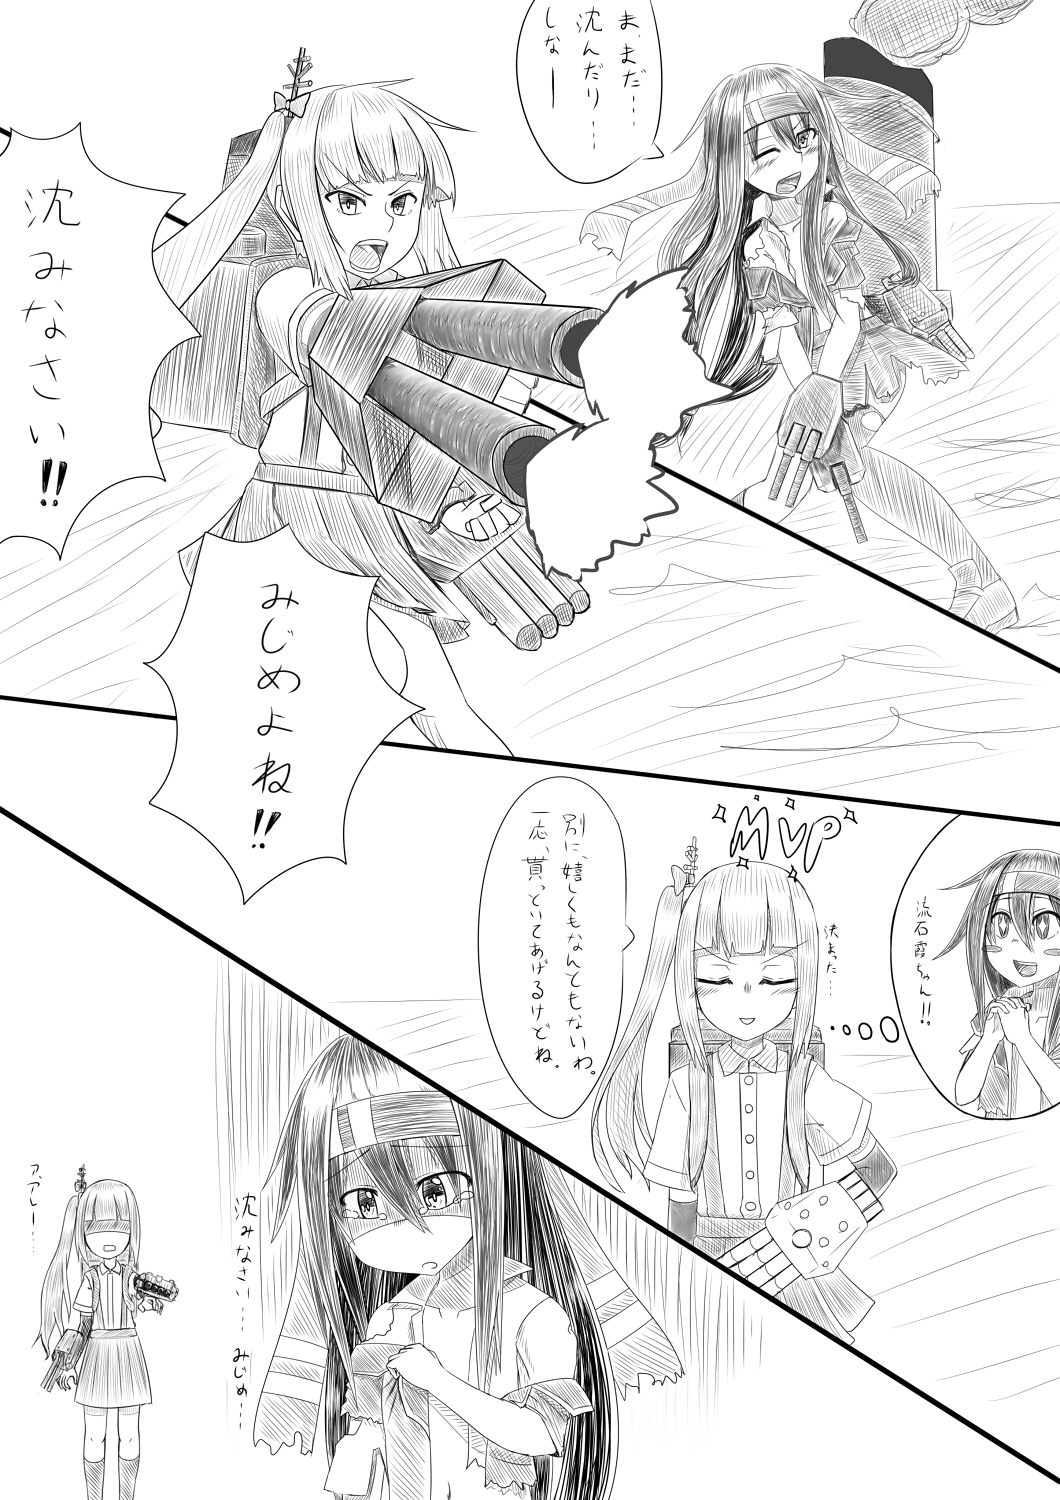 2girls blush_stickers cannon comic commentary_request gameplay_mechanics hatsushimo_(kantai_collection) headband highres kantai_collection kasumi_(kantai_collection) monochrome multiple_girls navel open_mouth sparkling_eyes tears torn_clothes translation_request zaki_(2872849)